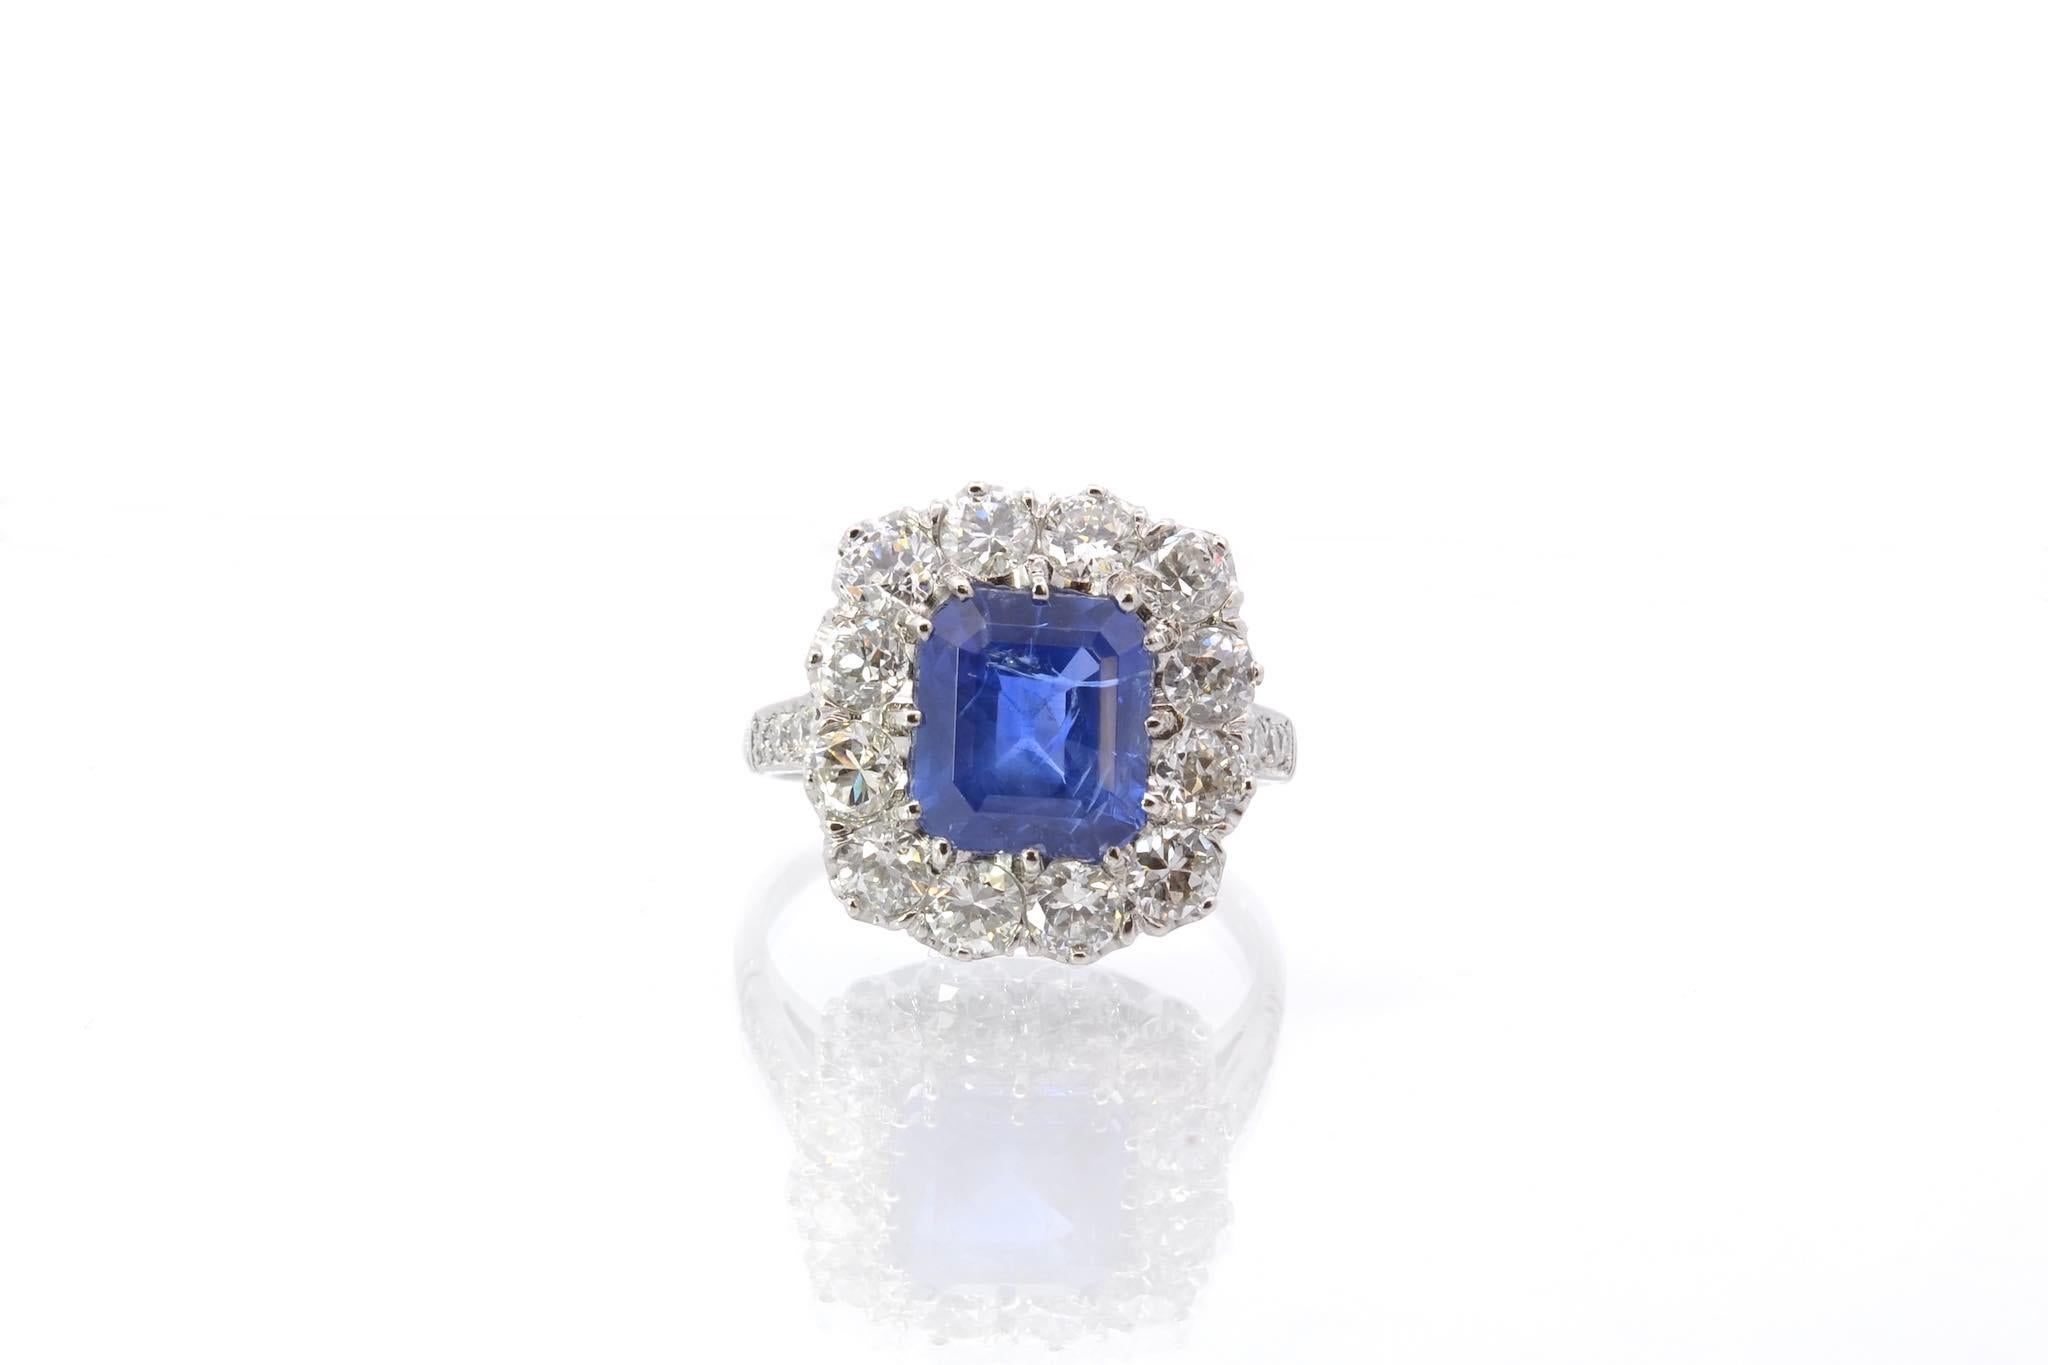 Stones: Sapphire of 4.24 cts and 18 diamonds of 1.70 cts
Material: Platinum
Dimensions: 1.6 x 1.5cm
Weight: 6.3g
Period: Recent vintage style
Size: 52 (free sizing)